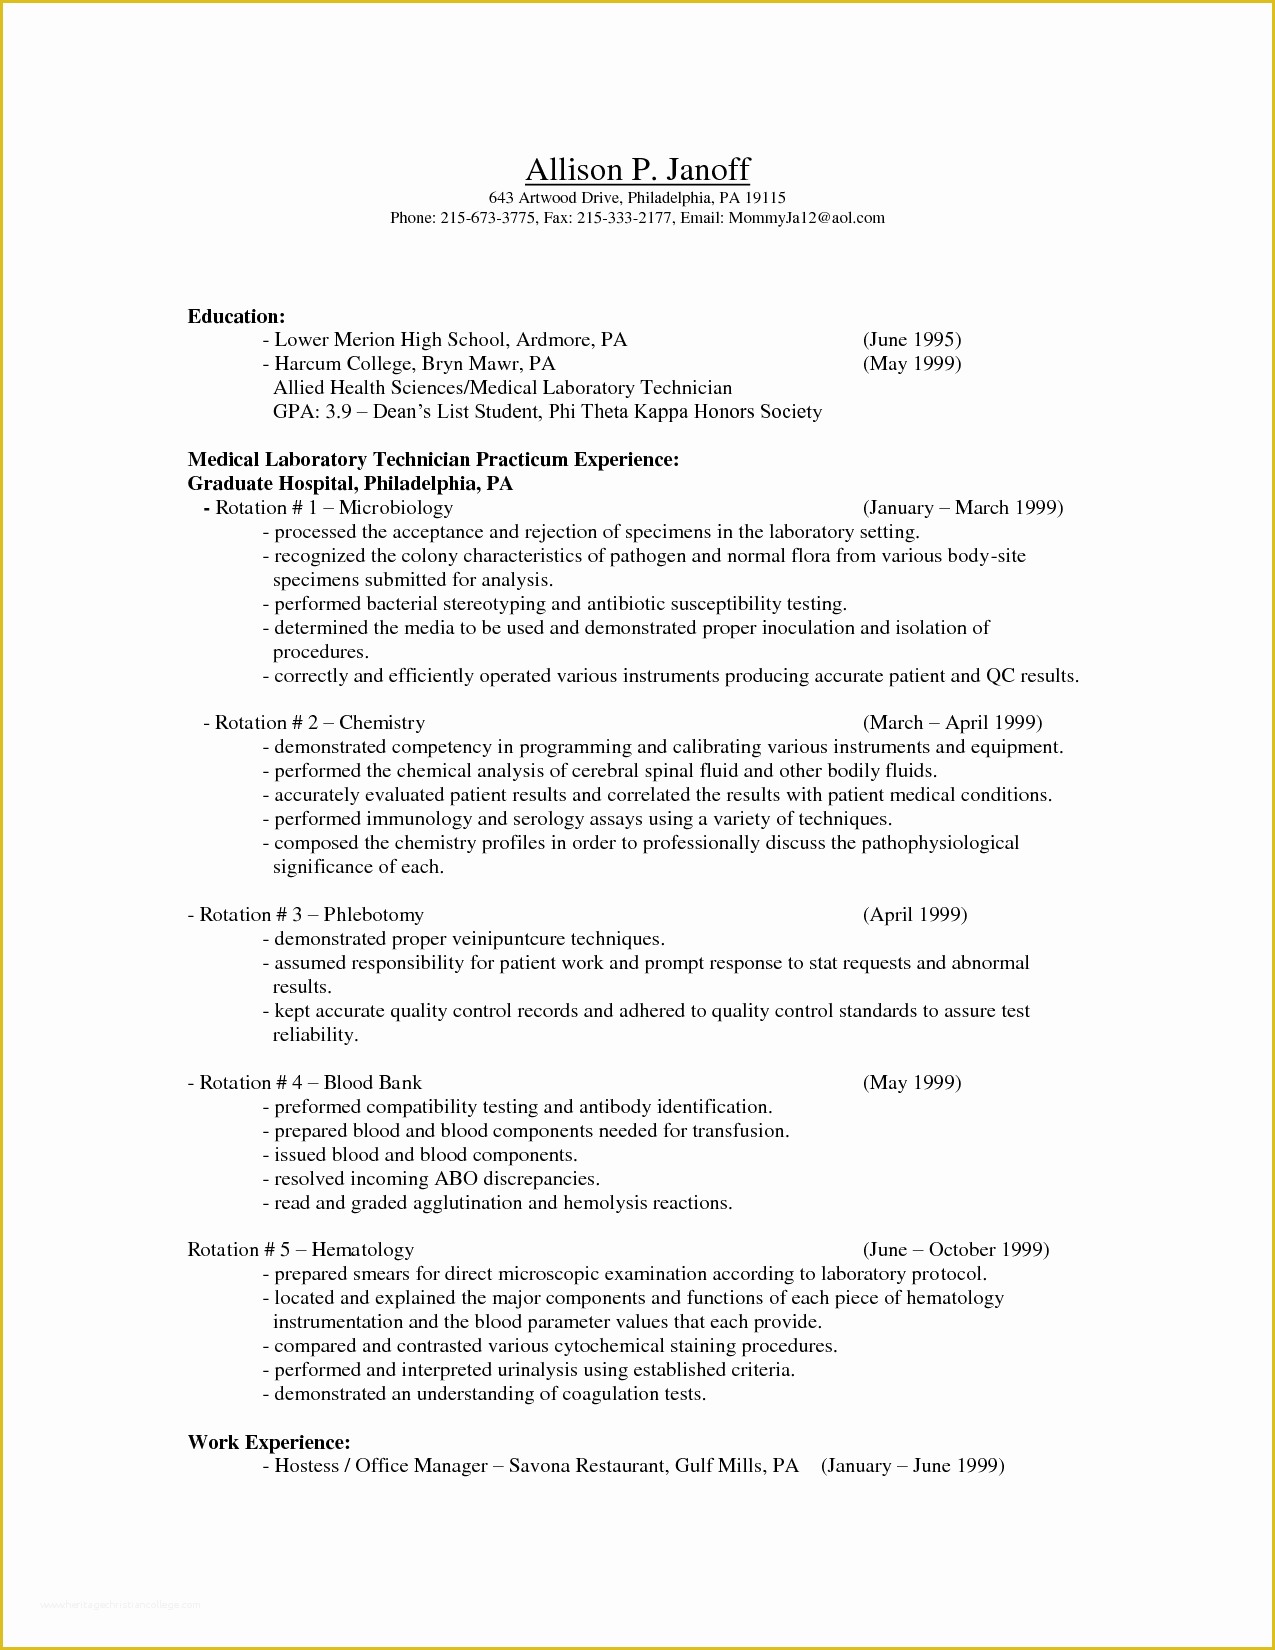 Free Resume Templates for Stay at Home Moms Of Stay at Home Mom Resume Sample